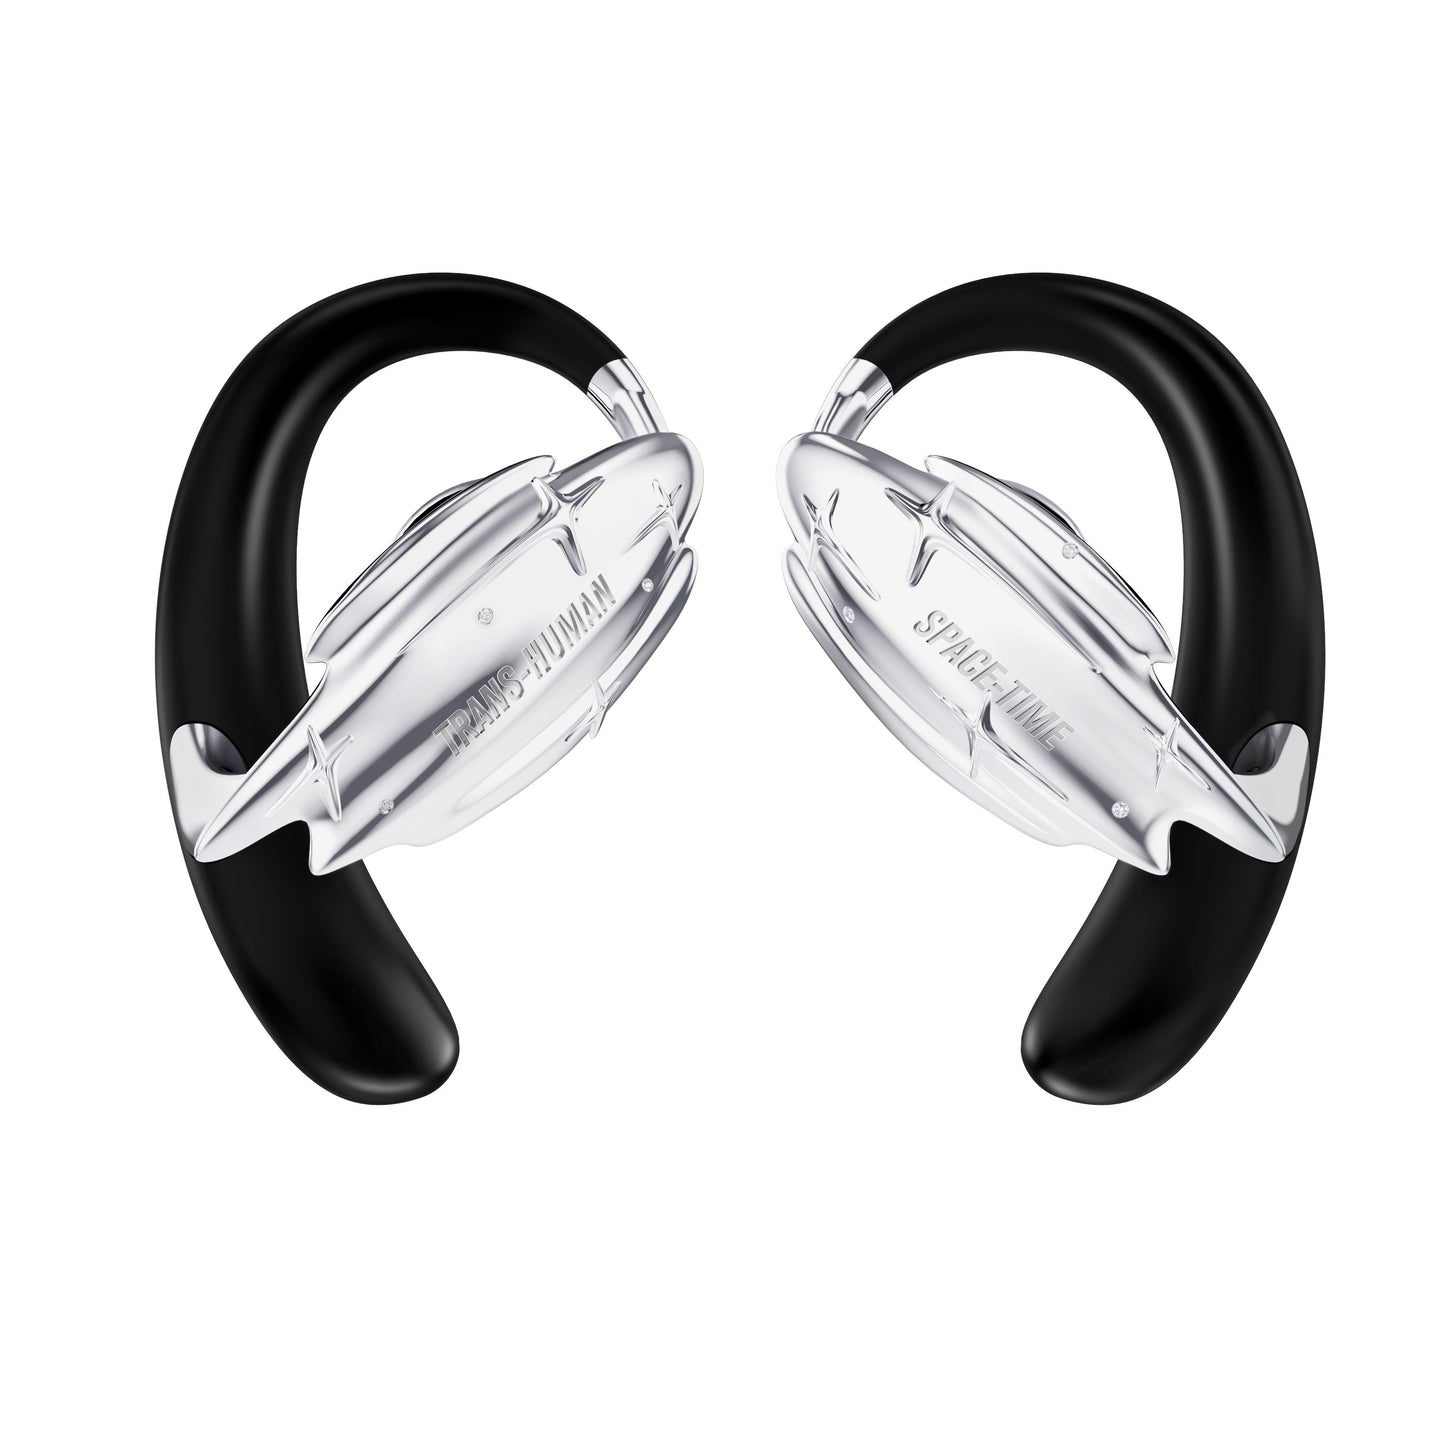 GALAXY - OWS Open-Style Accessory Headphones